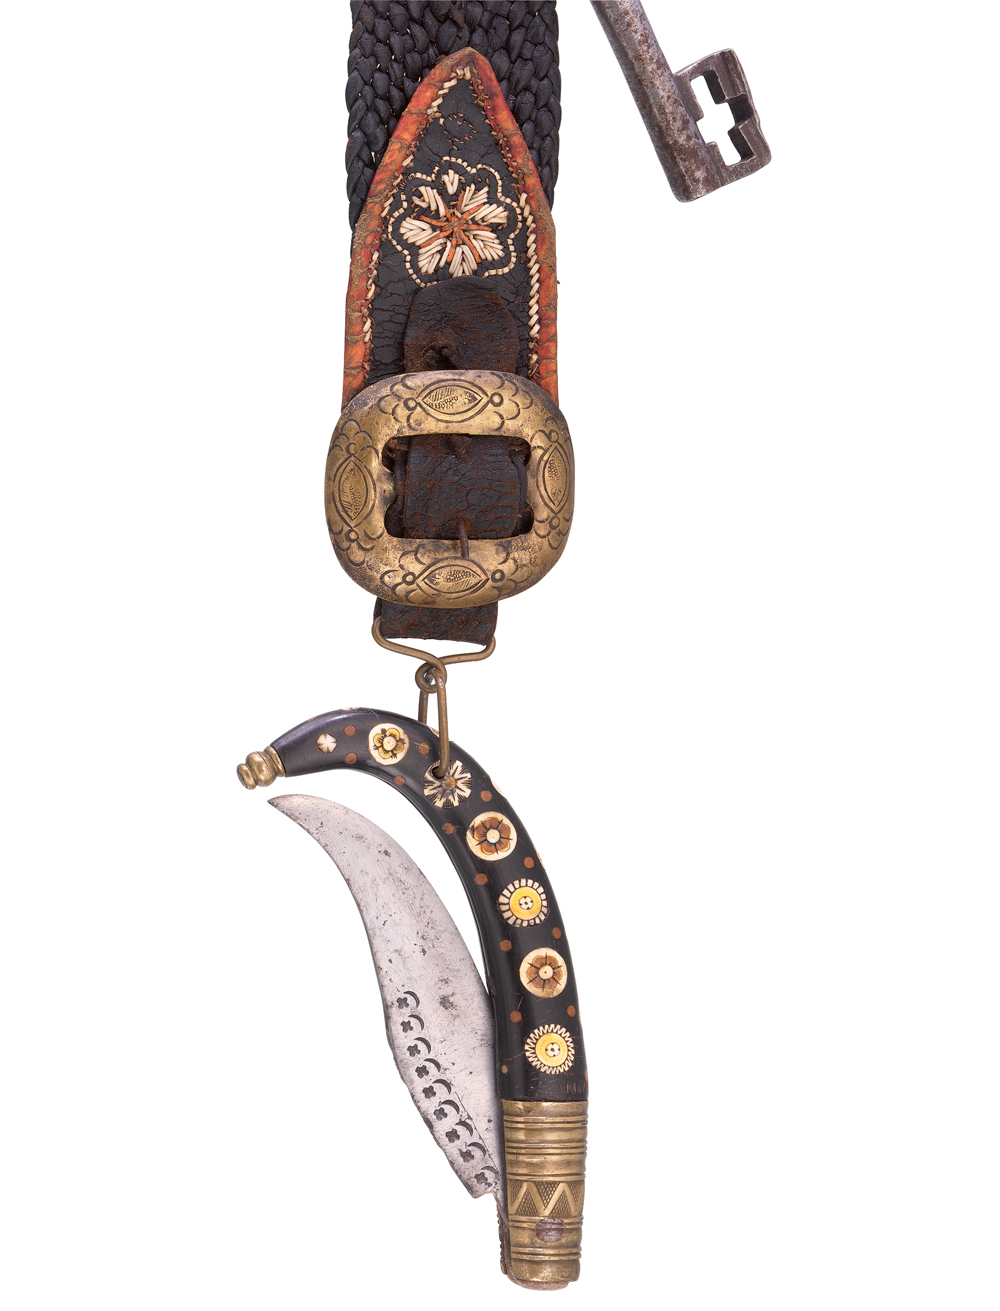 This brown leather belt strap was made in Tyrol in the middle of the 19th century. A rusty key is attached to the side of the belt and a folding knife decorated with floral inlays swings on the brass buckle.